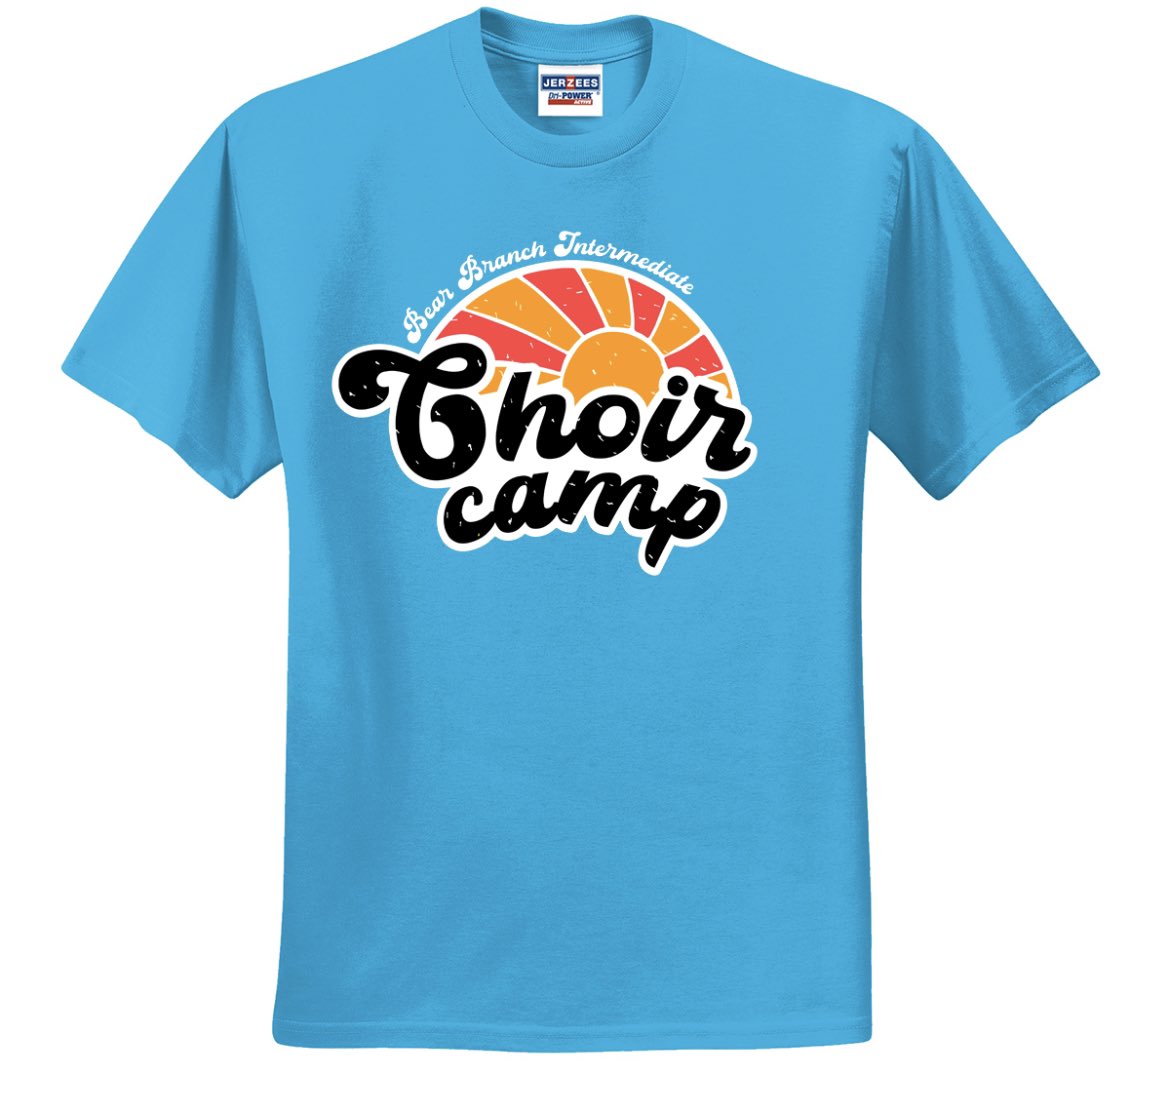 Bear Branch Intermediate Choir Camp Registration is now closed. All students attending must be pre-registered. No walk-ins allowed. Thank you! It’s almost summer 😎 @BearBranchInt @bearbranchelem @EllisorMusic @ParkwayBulldogs @CedricSmithElem @MagnoliaISD @FineArtsMISD